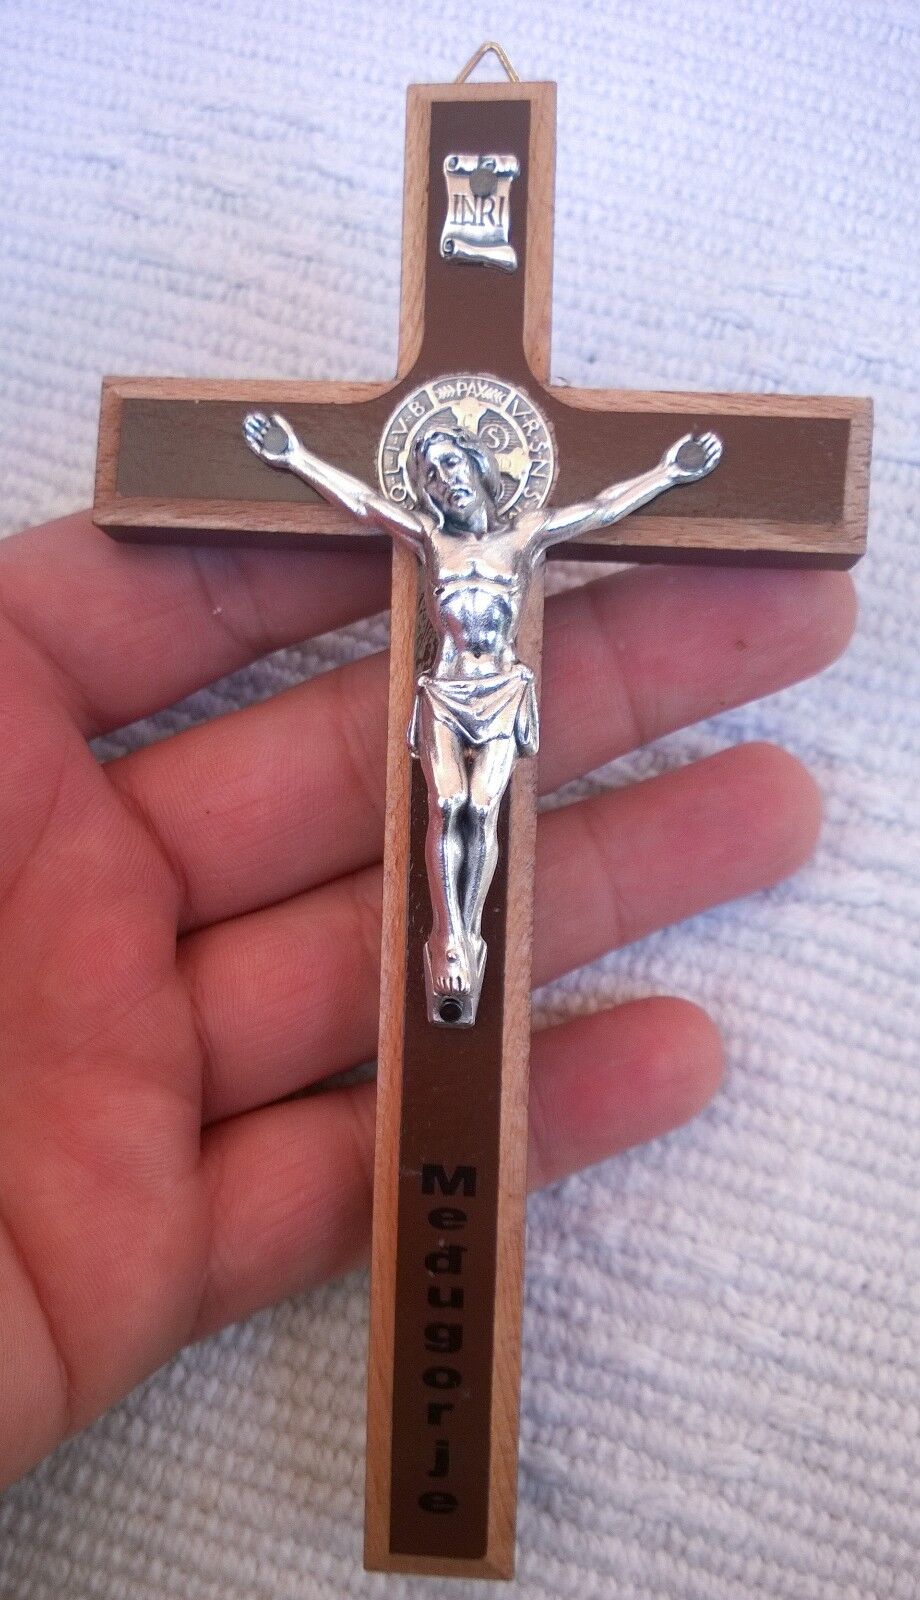 St Benedict Wall Hanging cross crucifix made of wood from Medjugorje 8.6 inc